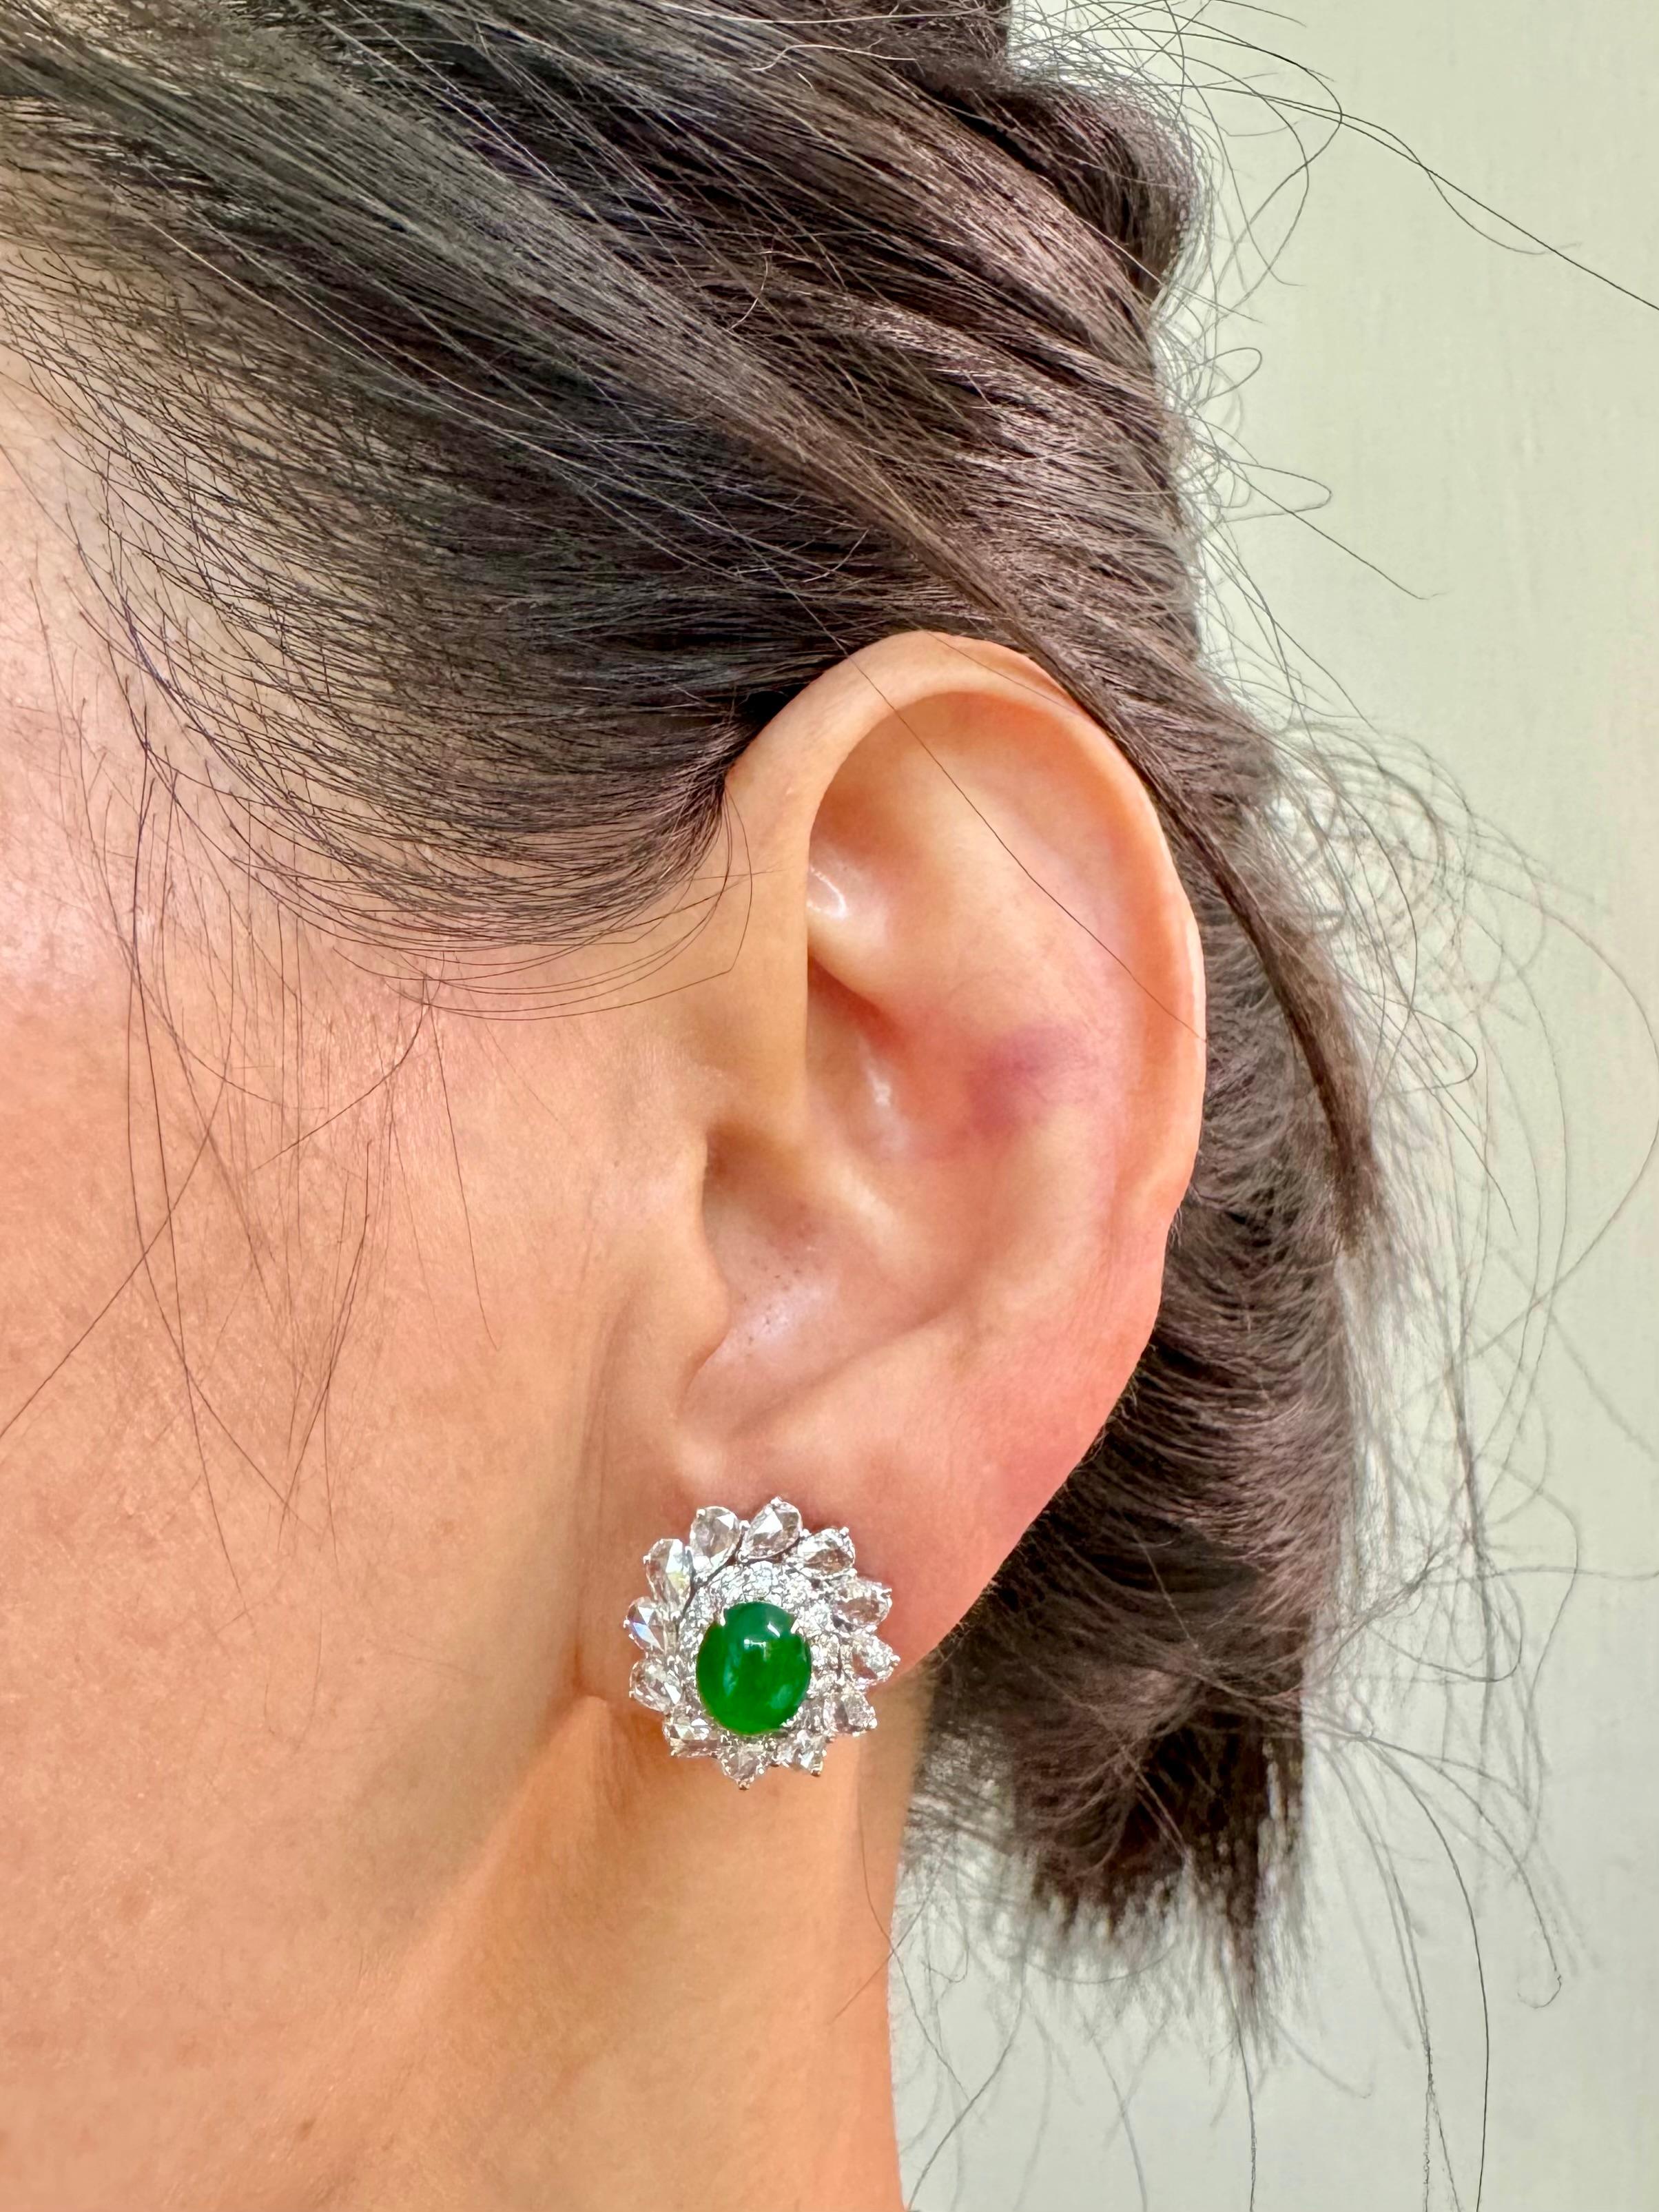 Please check out the HD video! It doesn't get much better than this! Here is a nice pair of true imperial green Jadeite Jade earrings. It has the best of the best glowing green color. The earrings are about 16.3mm x 15.1mm each in outer diameter.